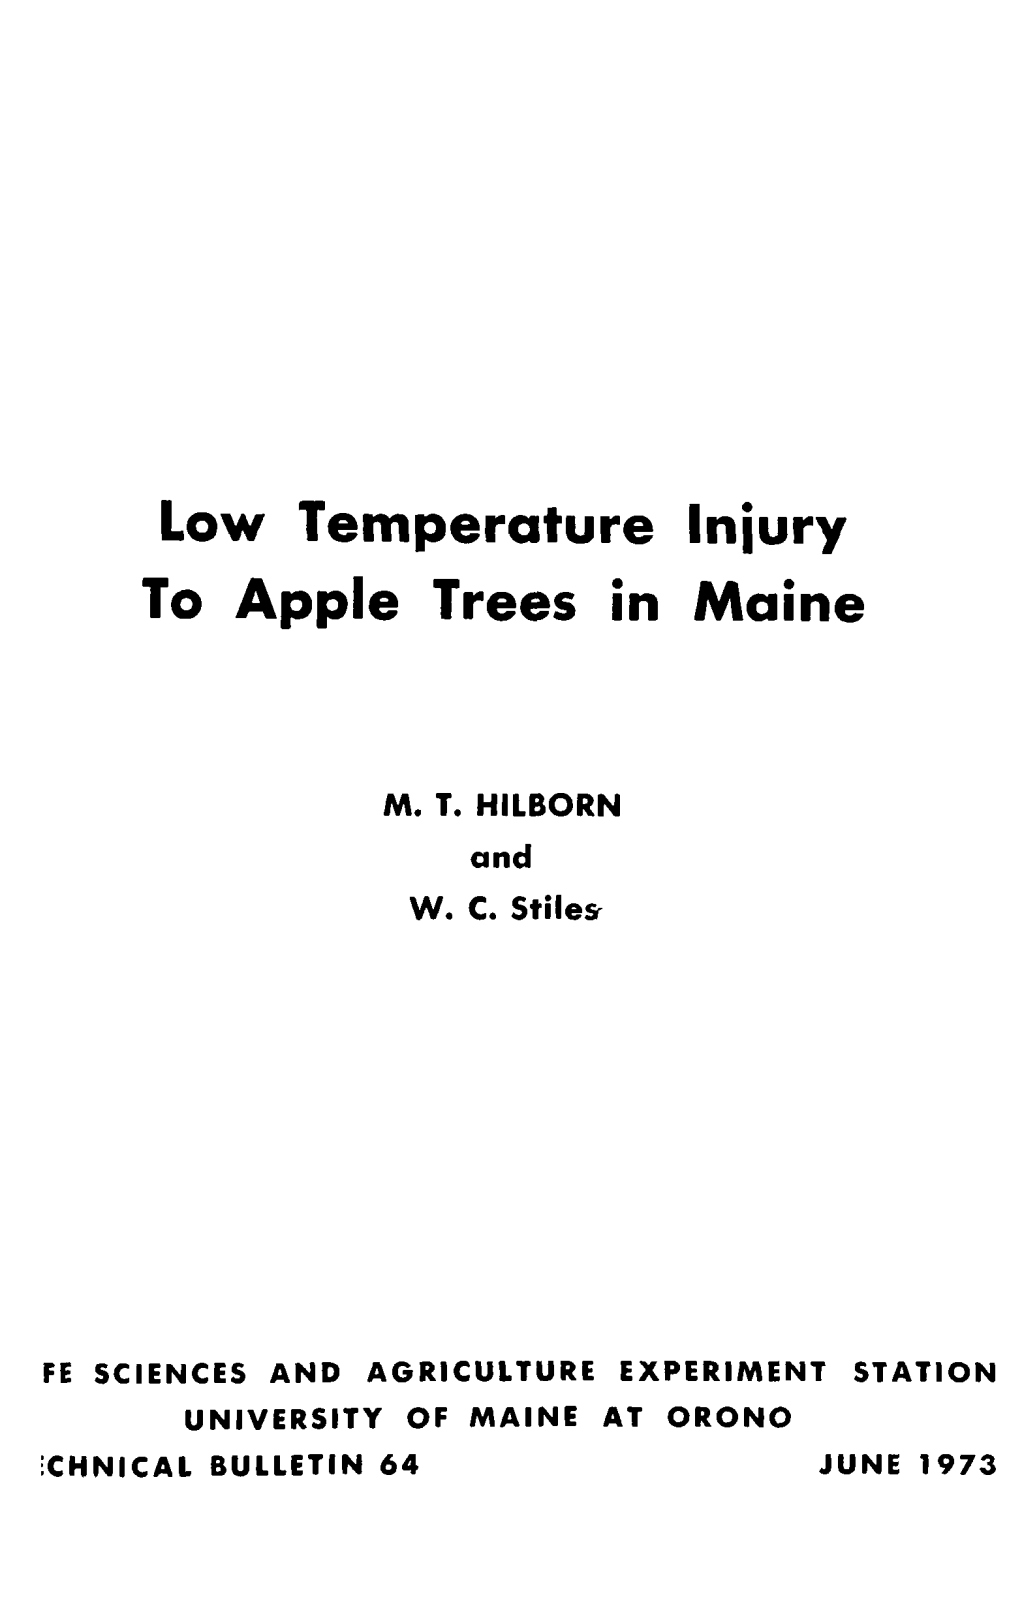 Low Temperature Injury to Apple Trees in Maine